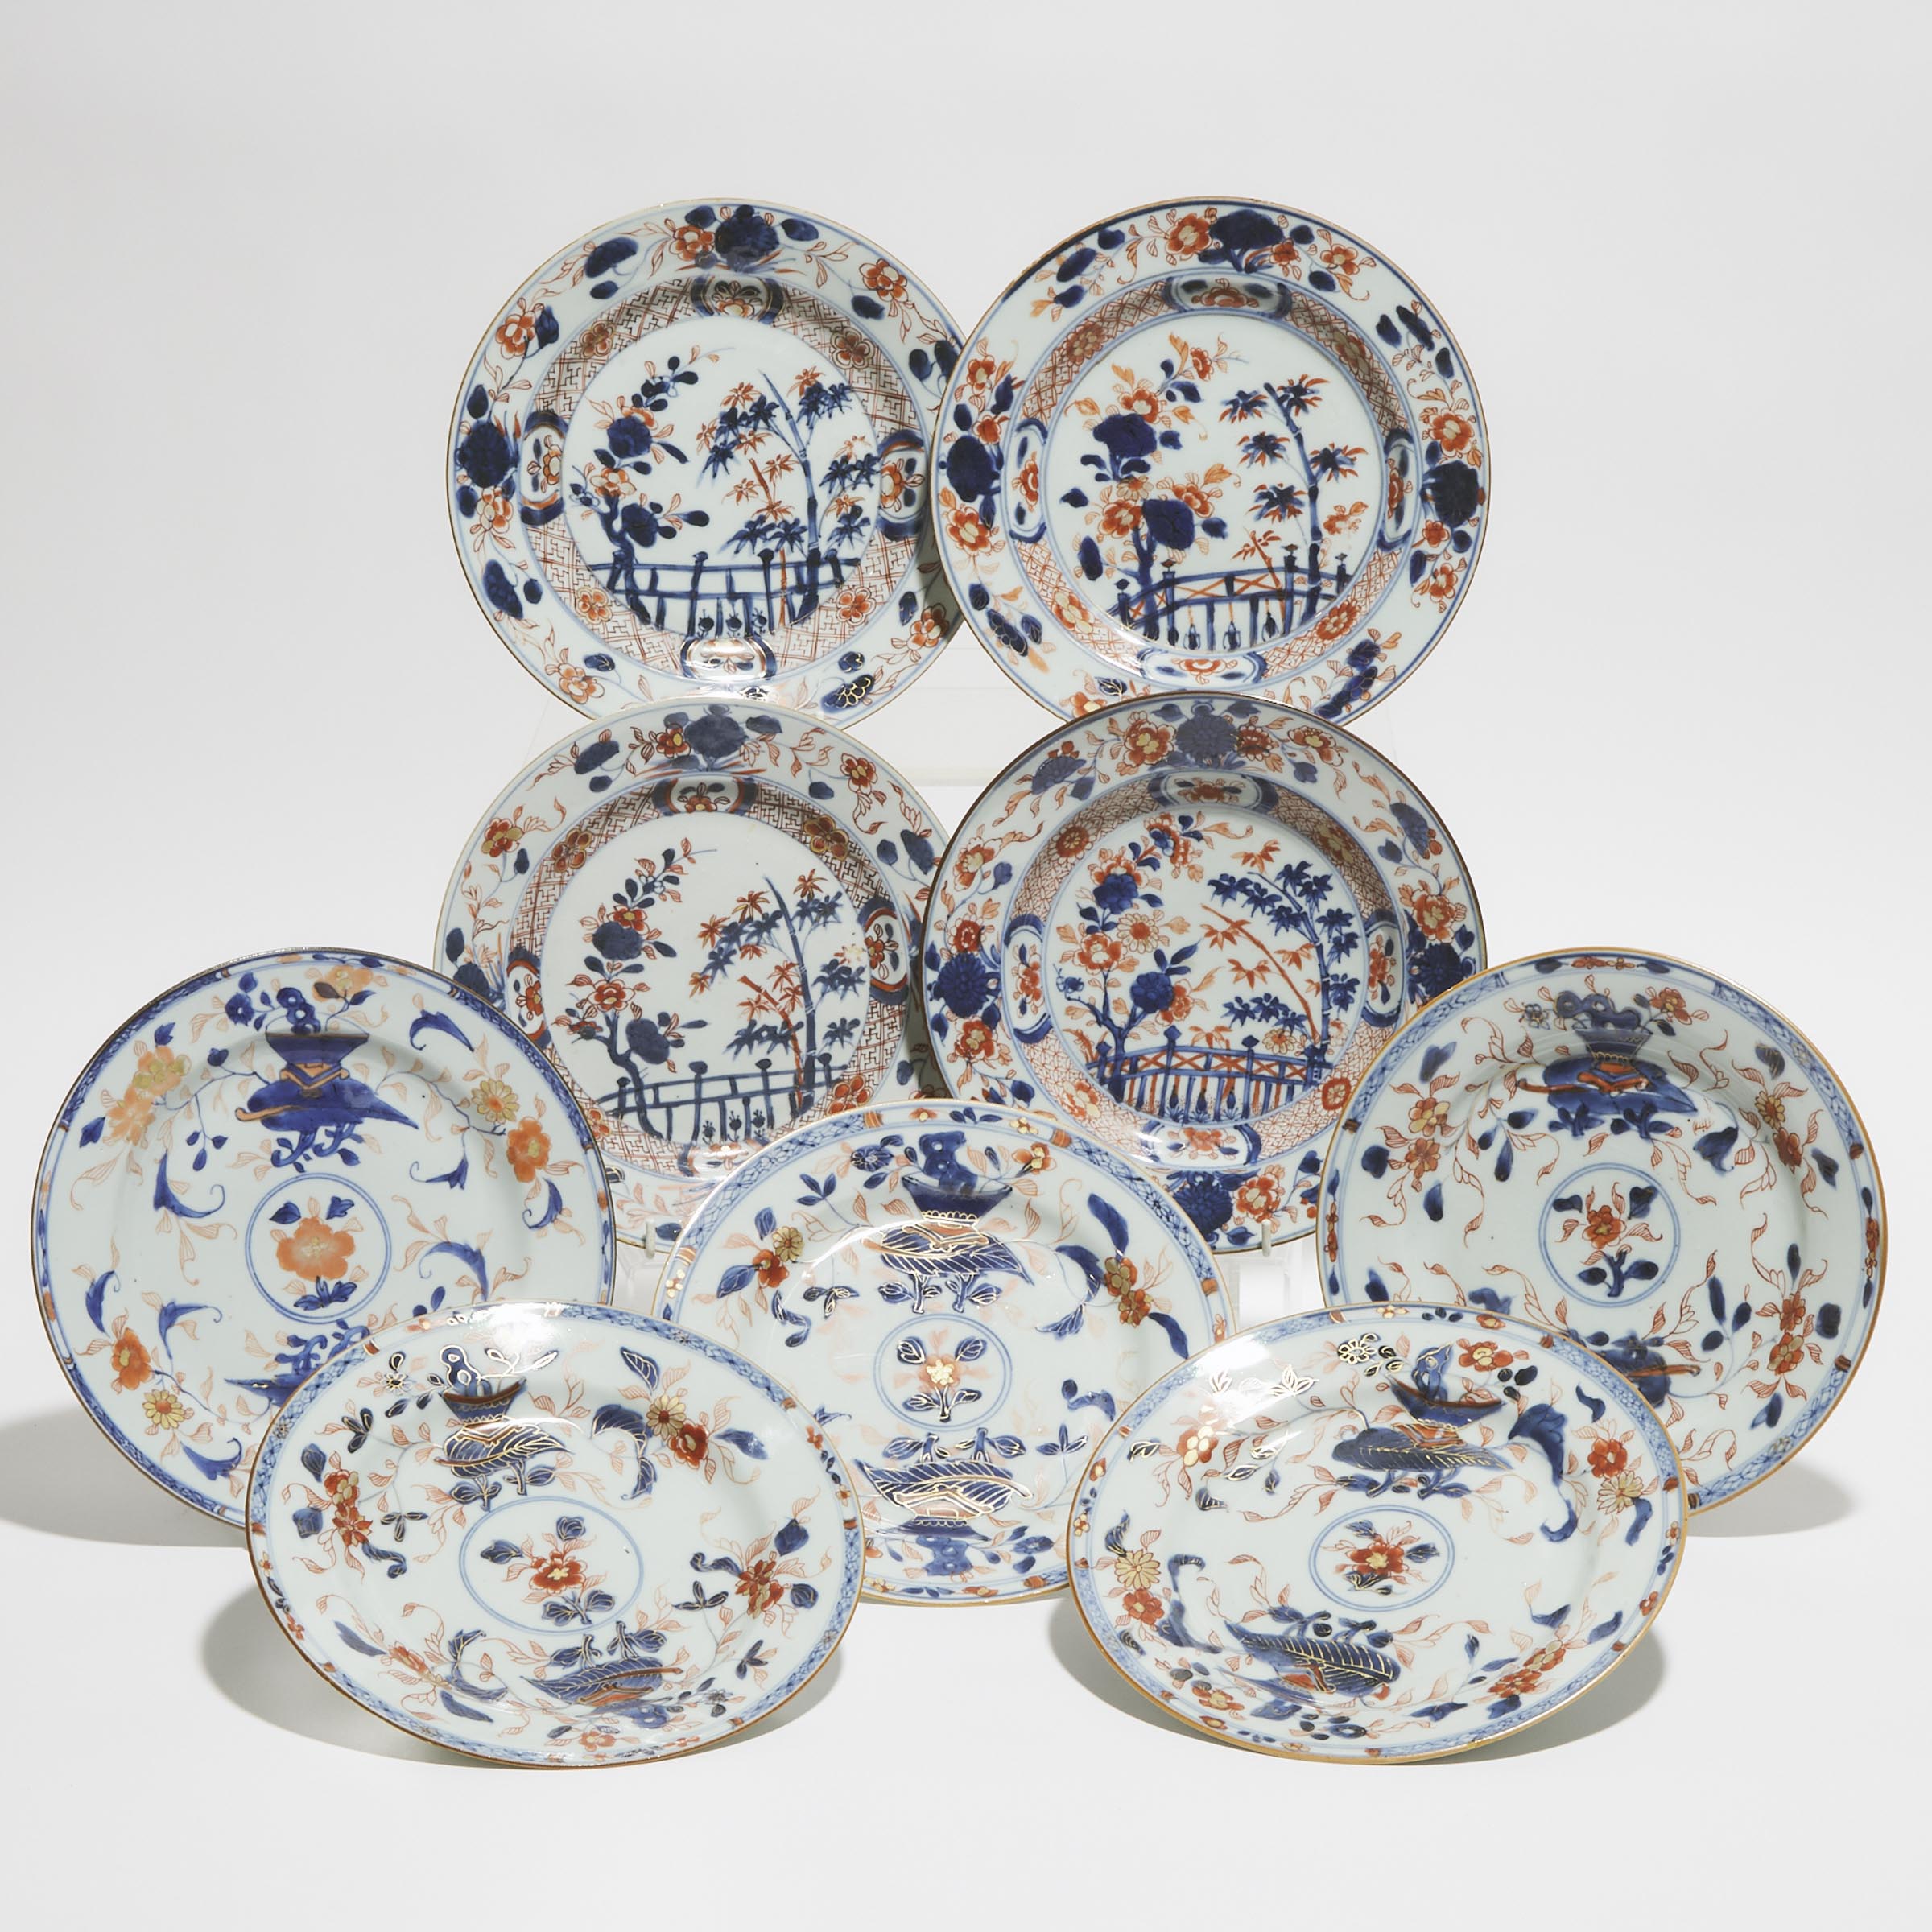 A Set of Five Chinese Imari Dishes, together with a Set of Four Dishes, Kangxi Period (1662-1722)